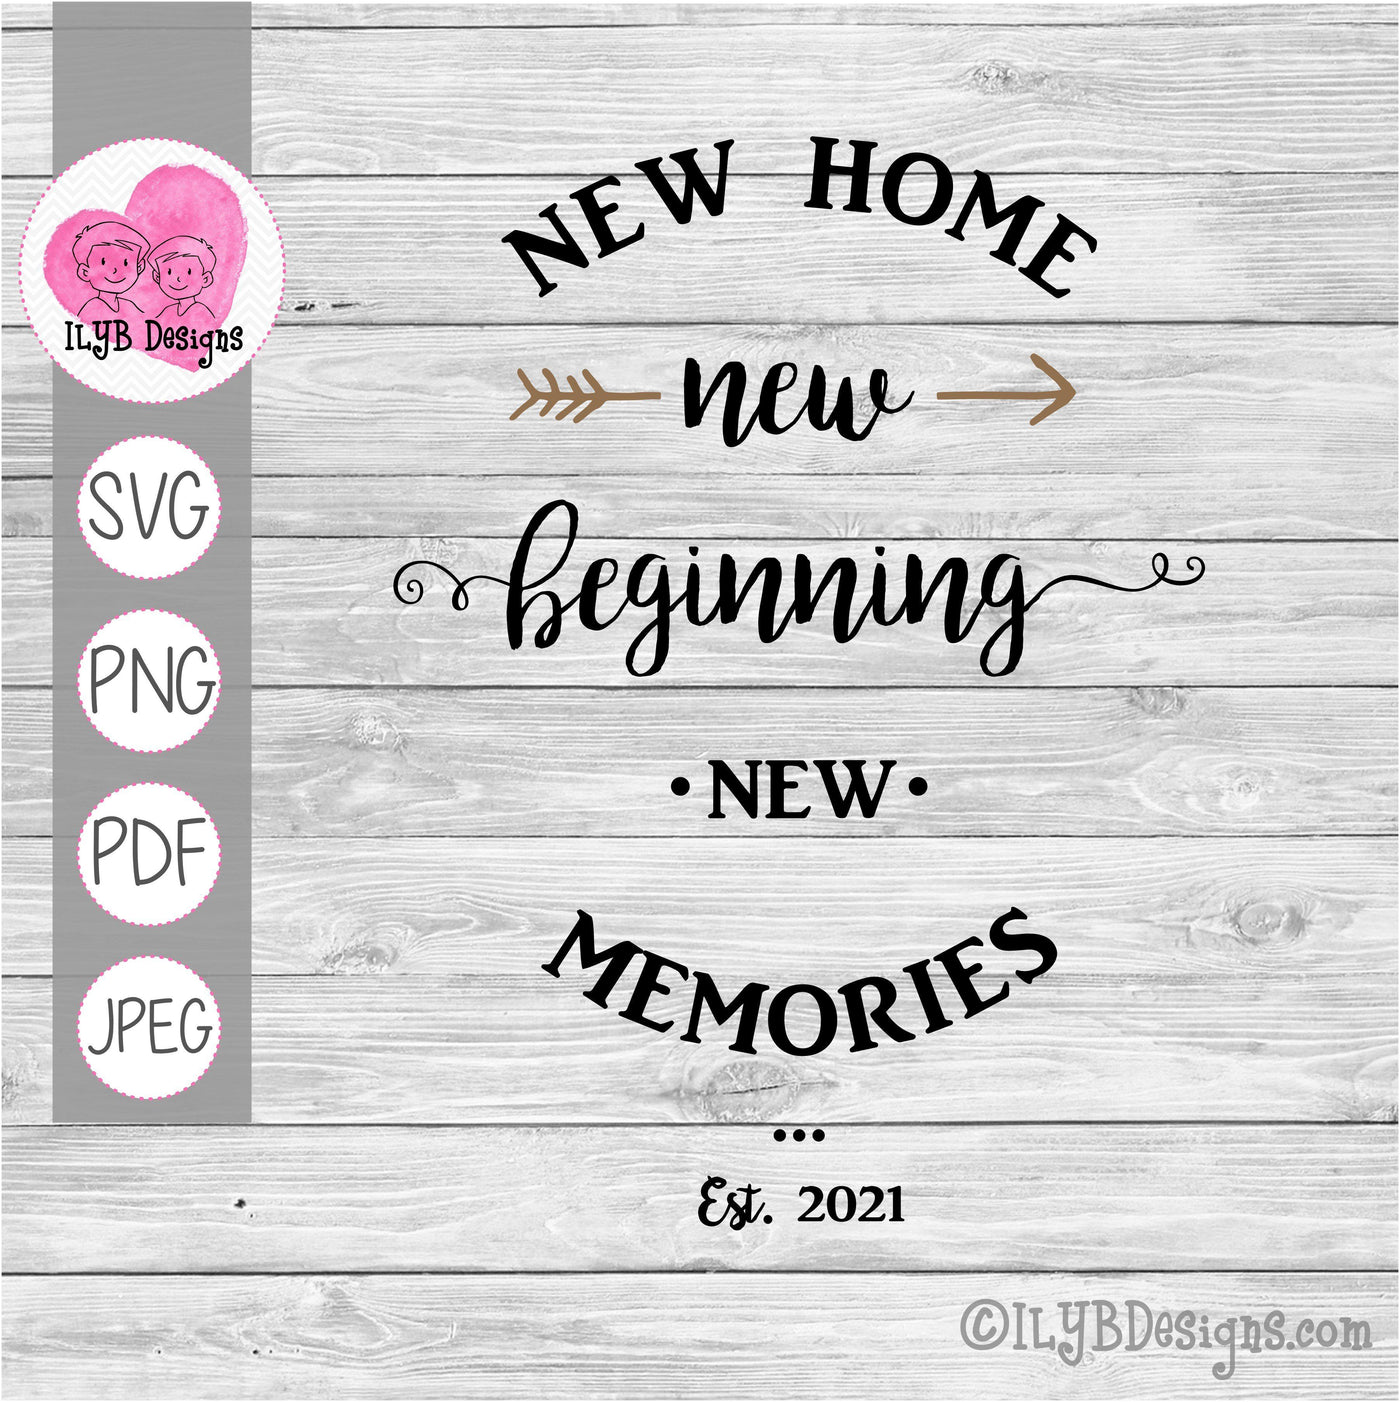 New Home New Beginning New Memories SVG, New Home Sign Cut File - ILYB Designs